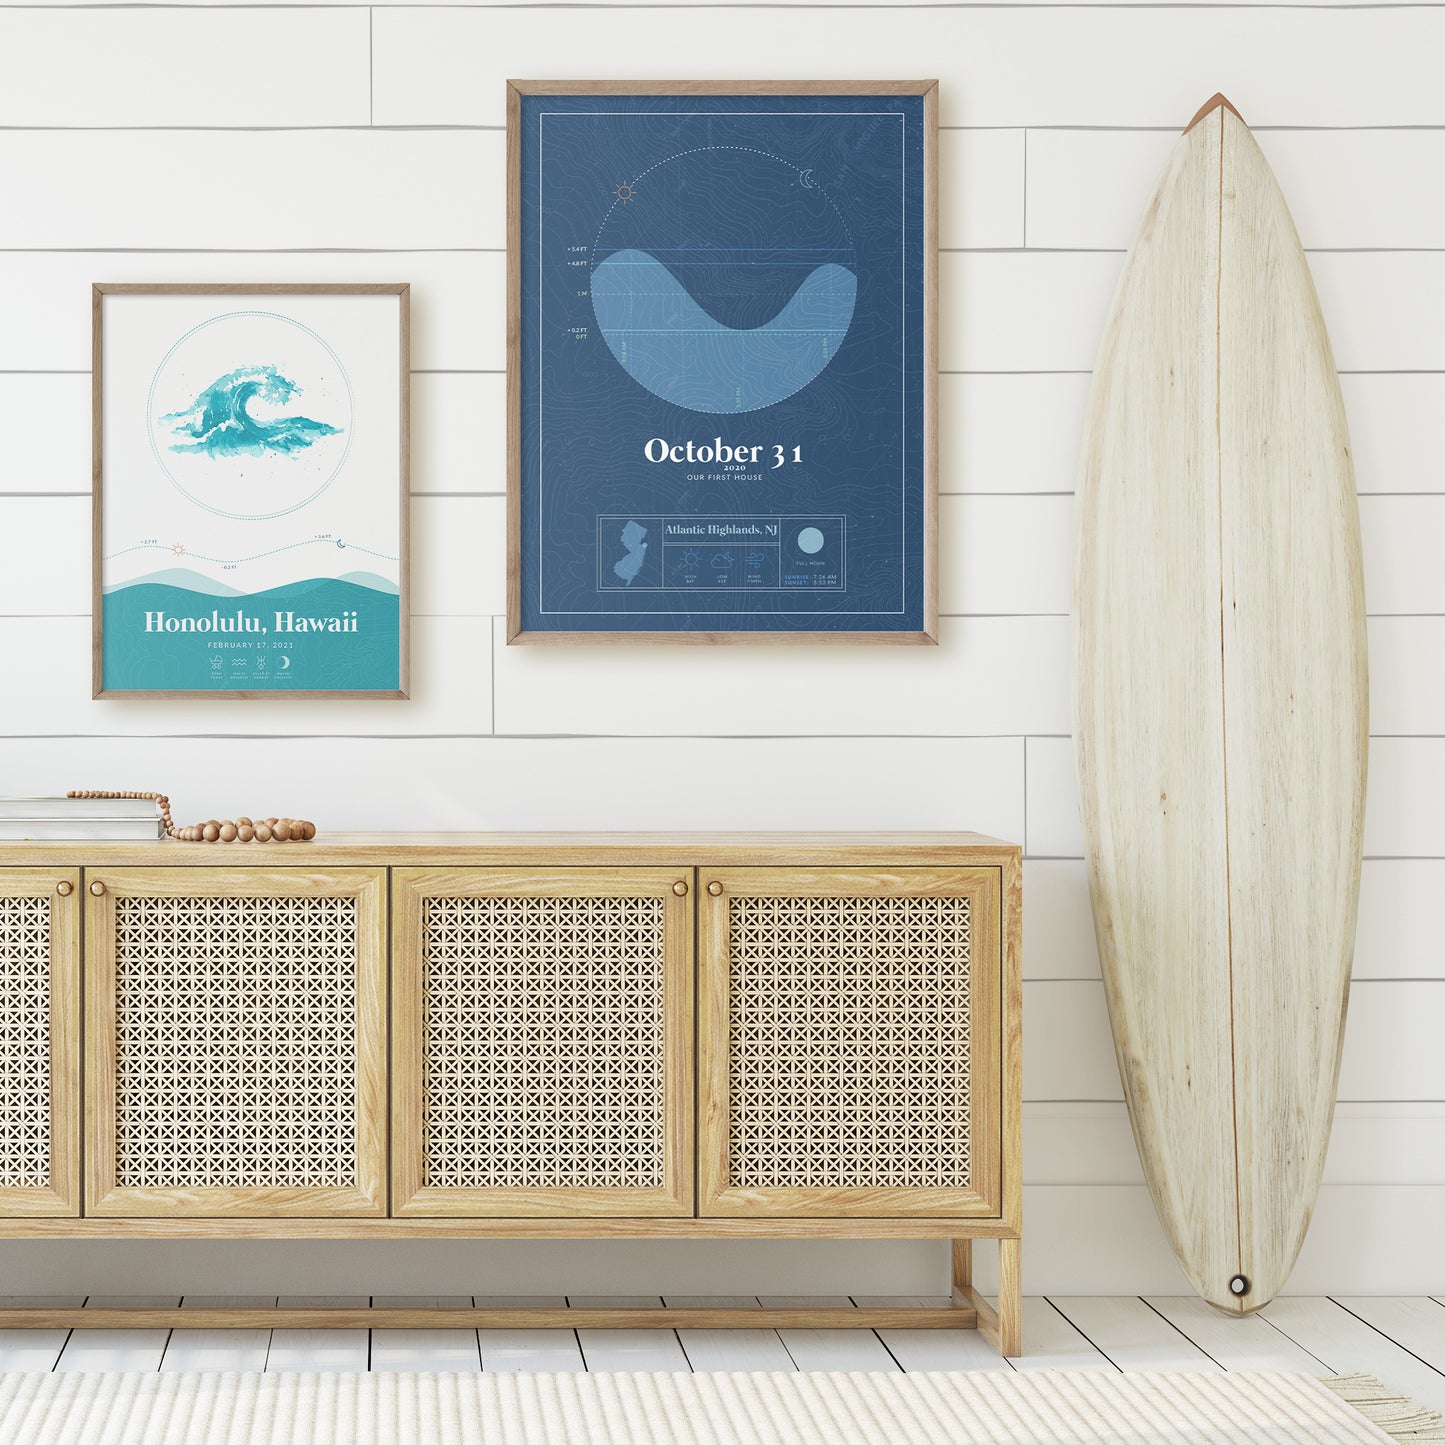 two wood framed pictures of the personalized tide map posters by salt atlas in the Waves option and vintage cobalt blue color of the Nautical Tide Map option in a home setting. These are custom posters showing the tide, weather, and moon phase for a special day, like an anniversary or birthday.